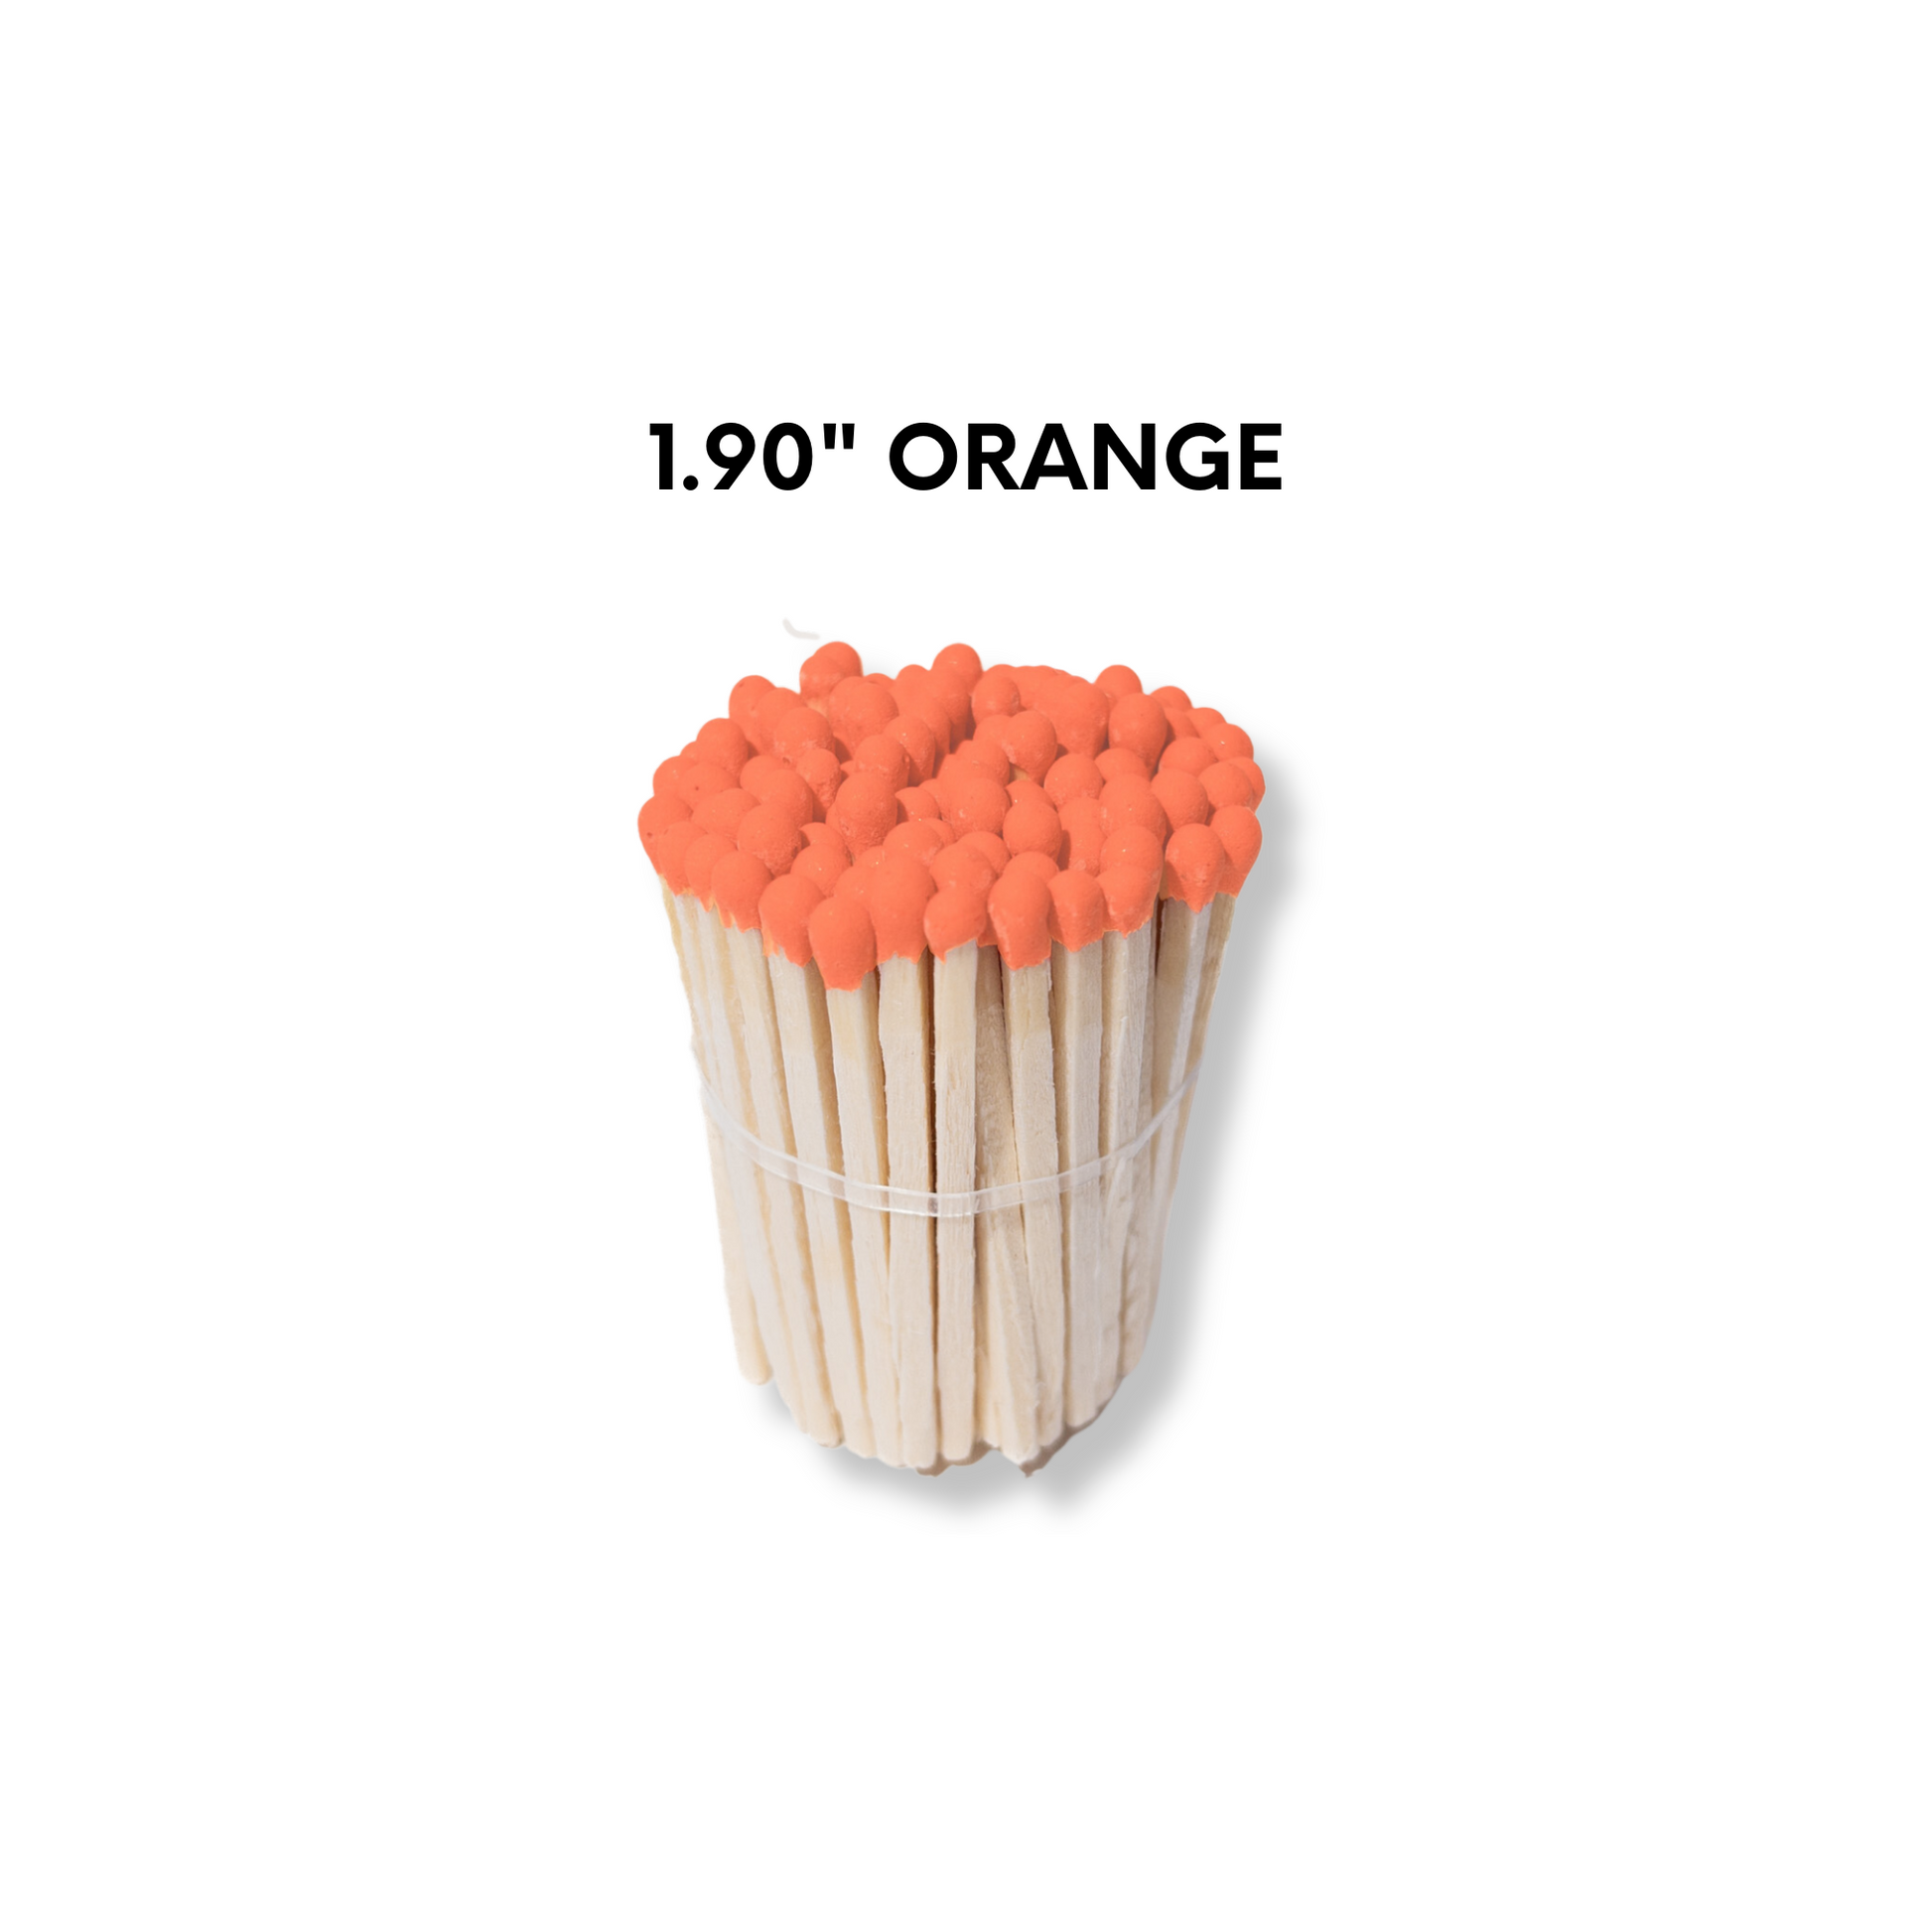 Orange and Black colored Tipped matches 1.85 Safety Matches